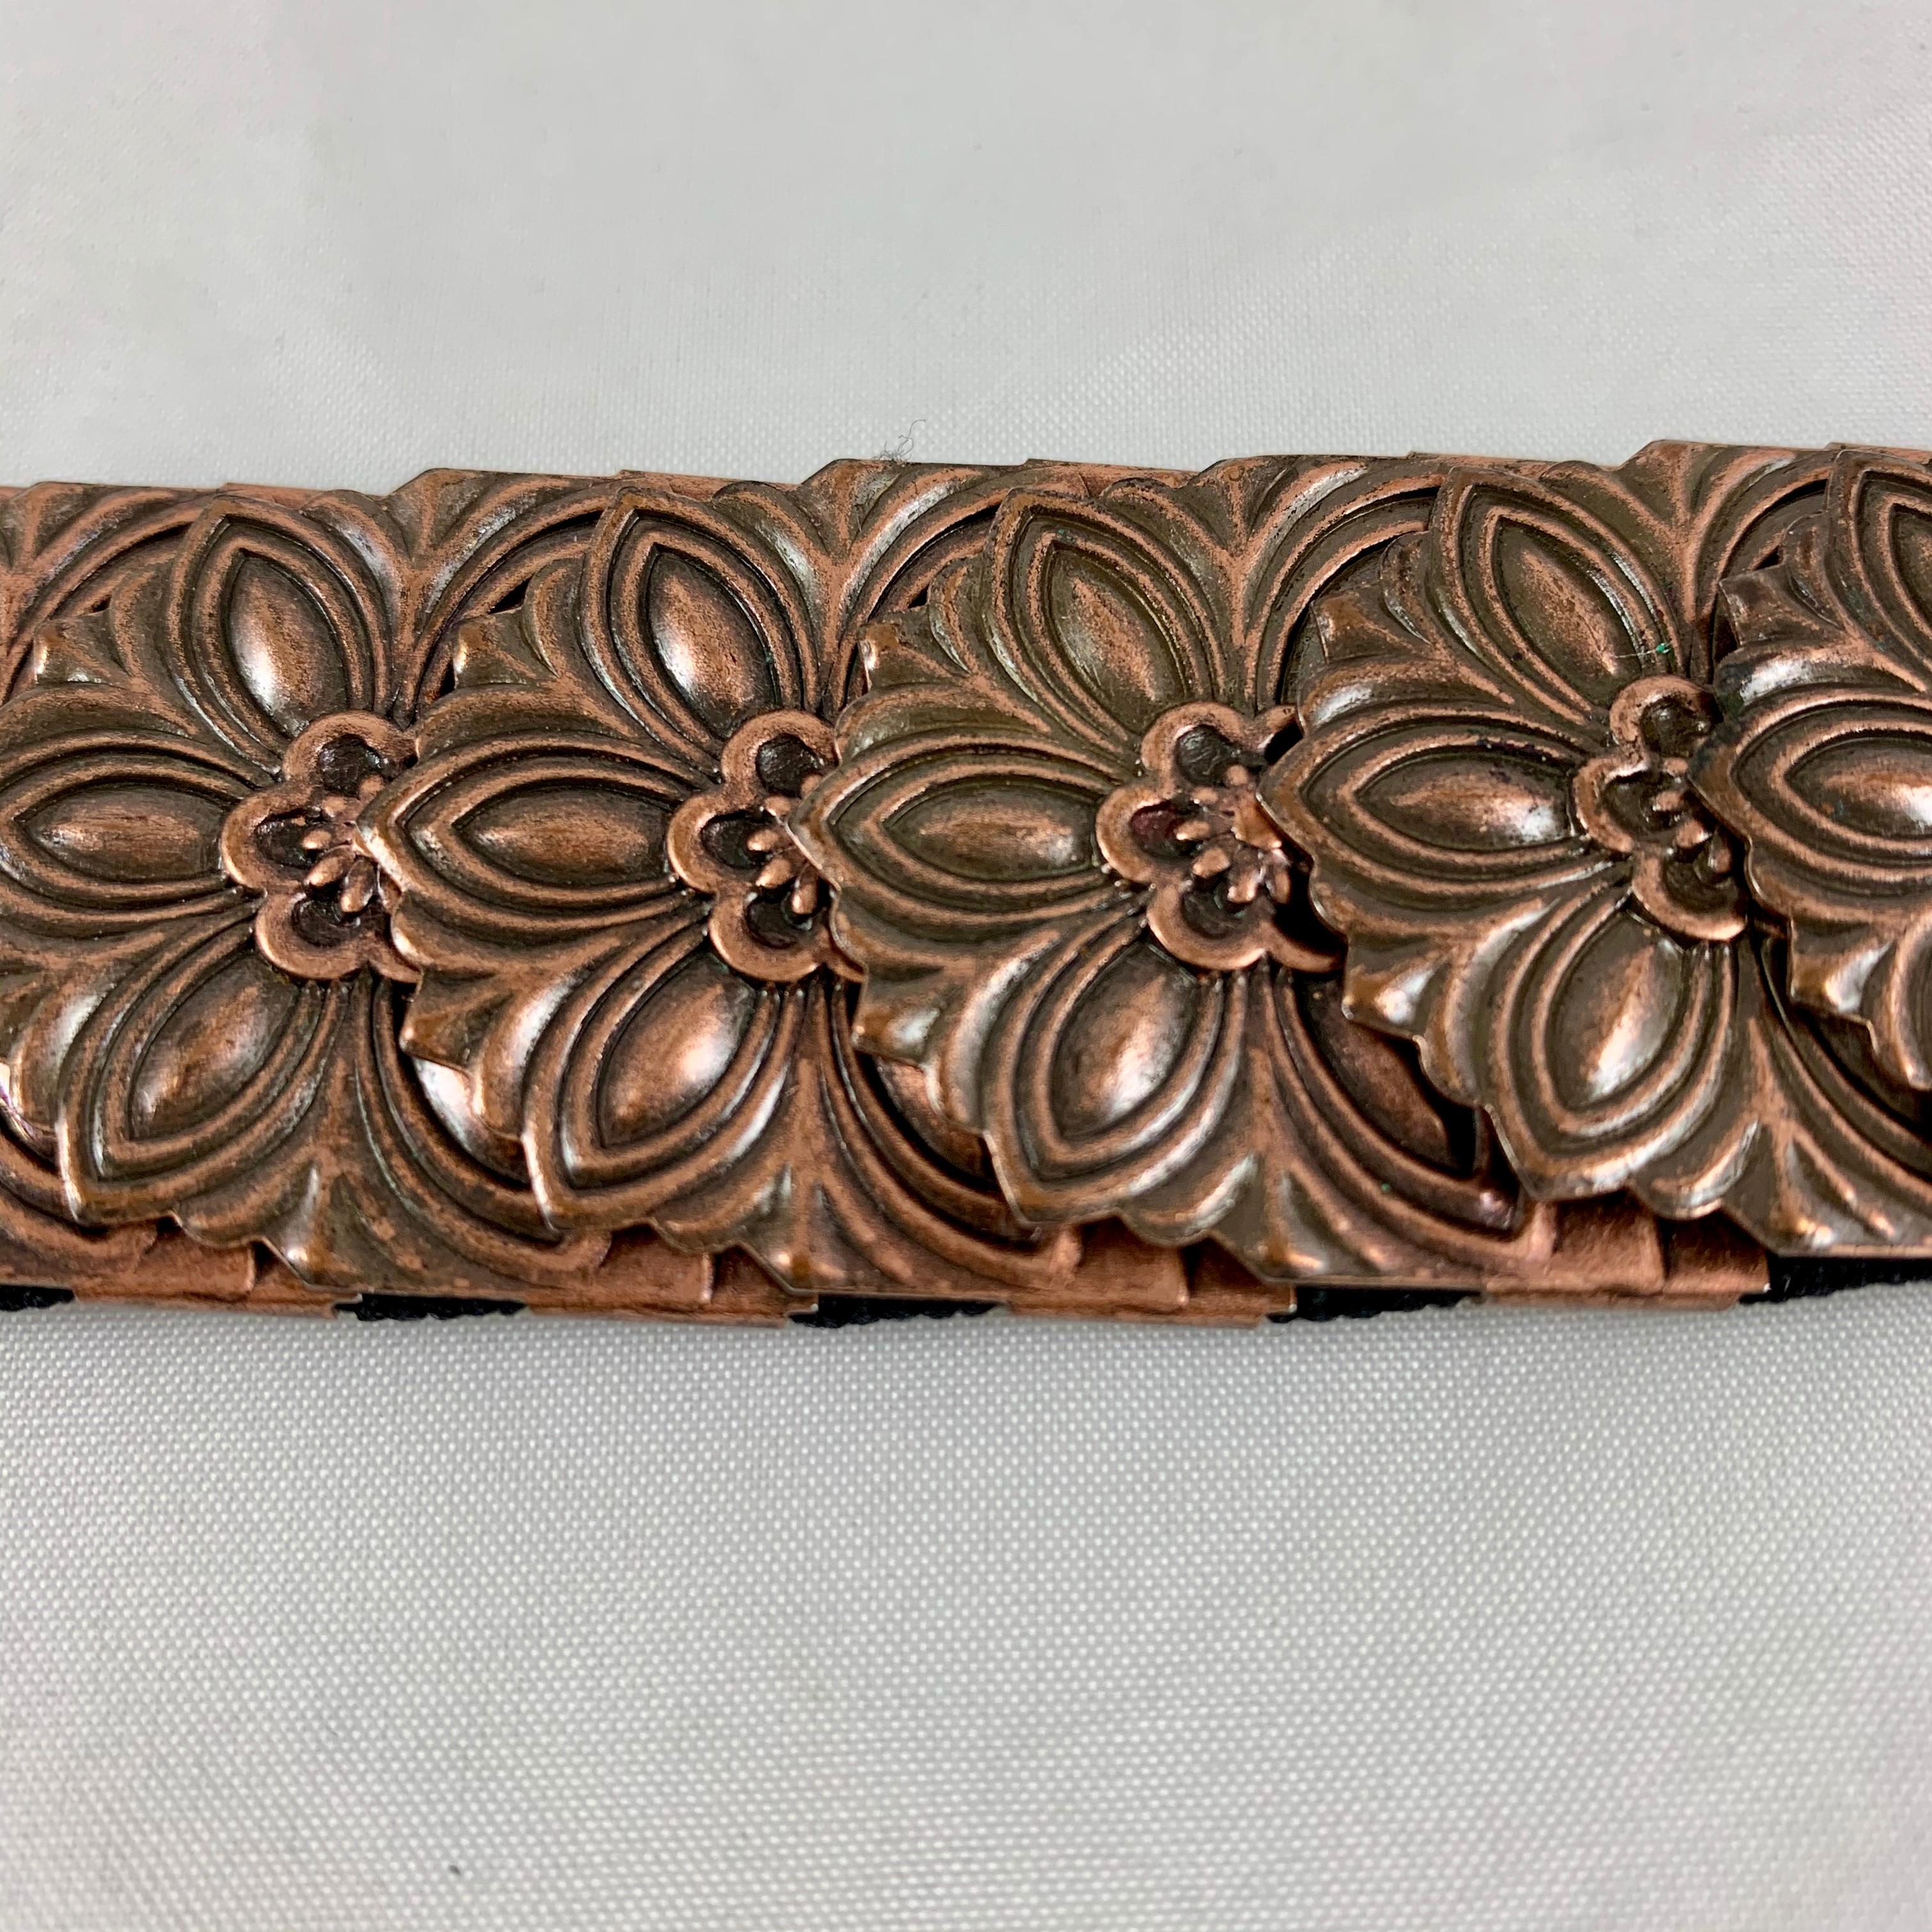 1970s Era Copper-Tone Snake Scale Metal and Crystal Jeweled Buckle Handmade Belt For Sale 1